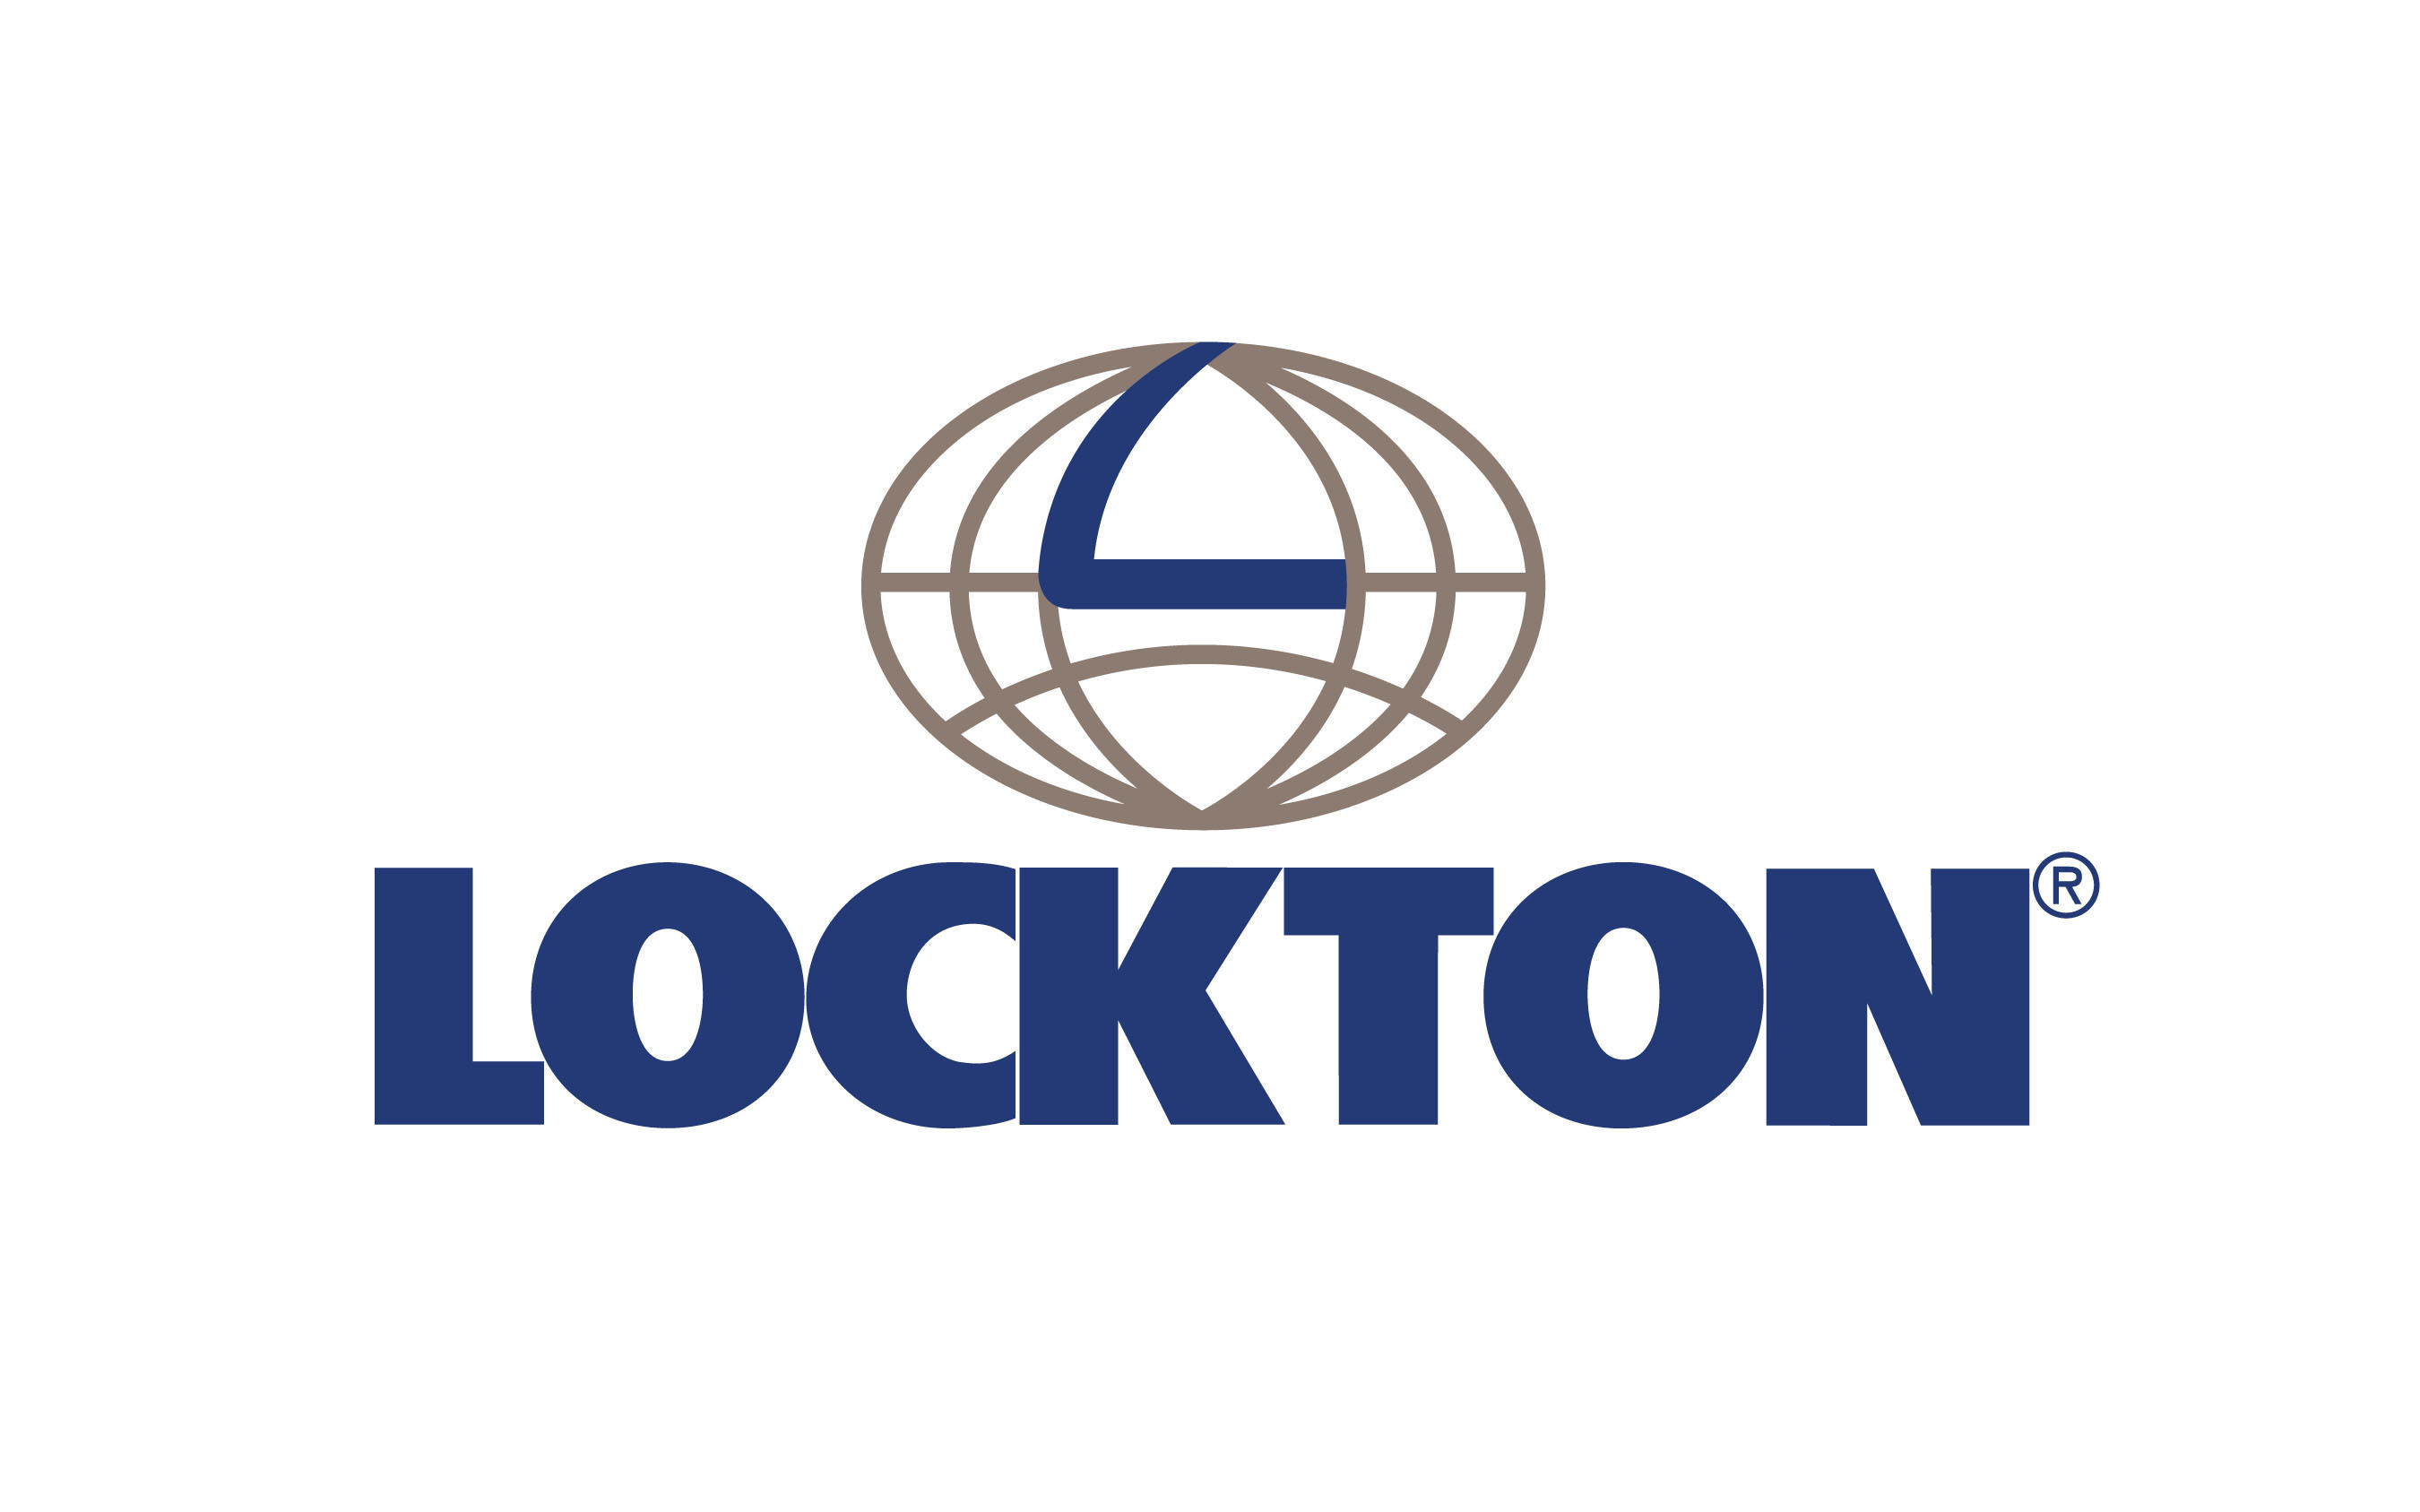 Lockton Financial Services adds new cyber leadership for Pacific region